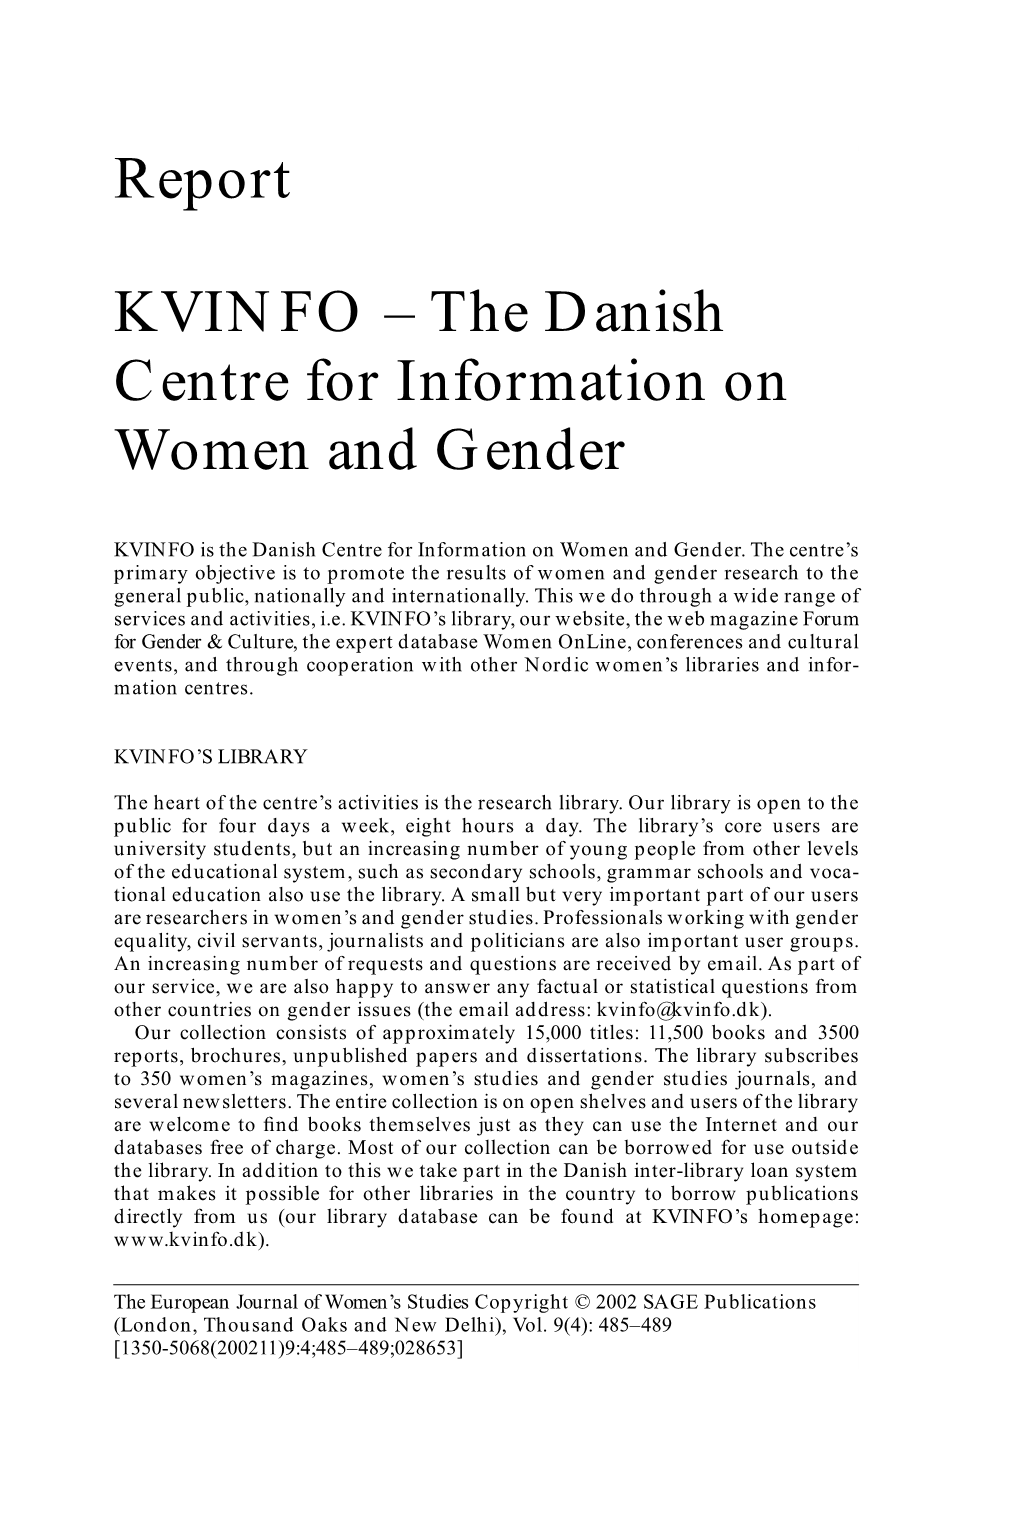 The Danish Centre for Information on Women and Gender